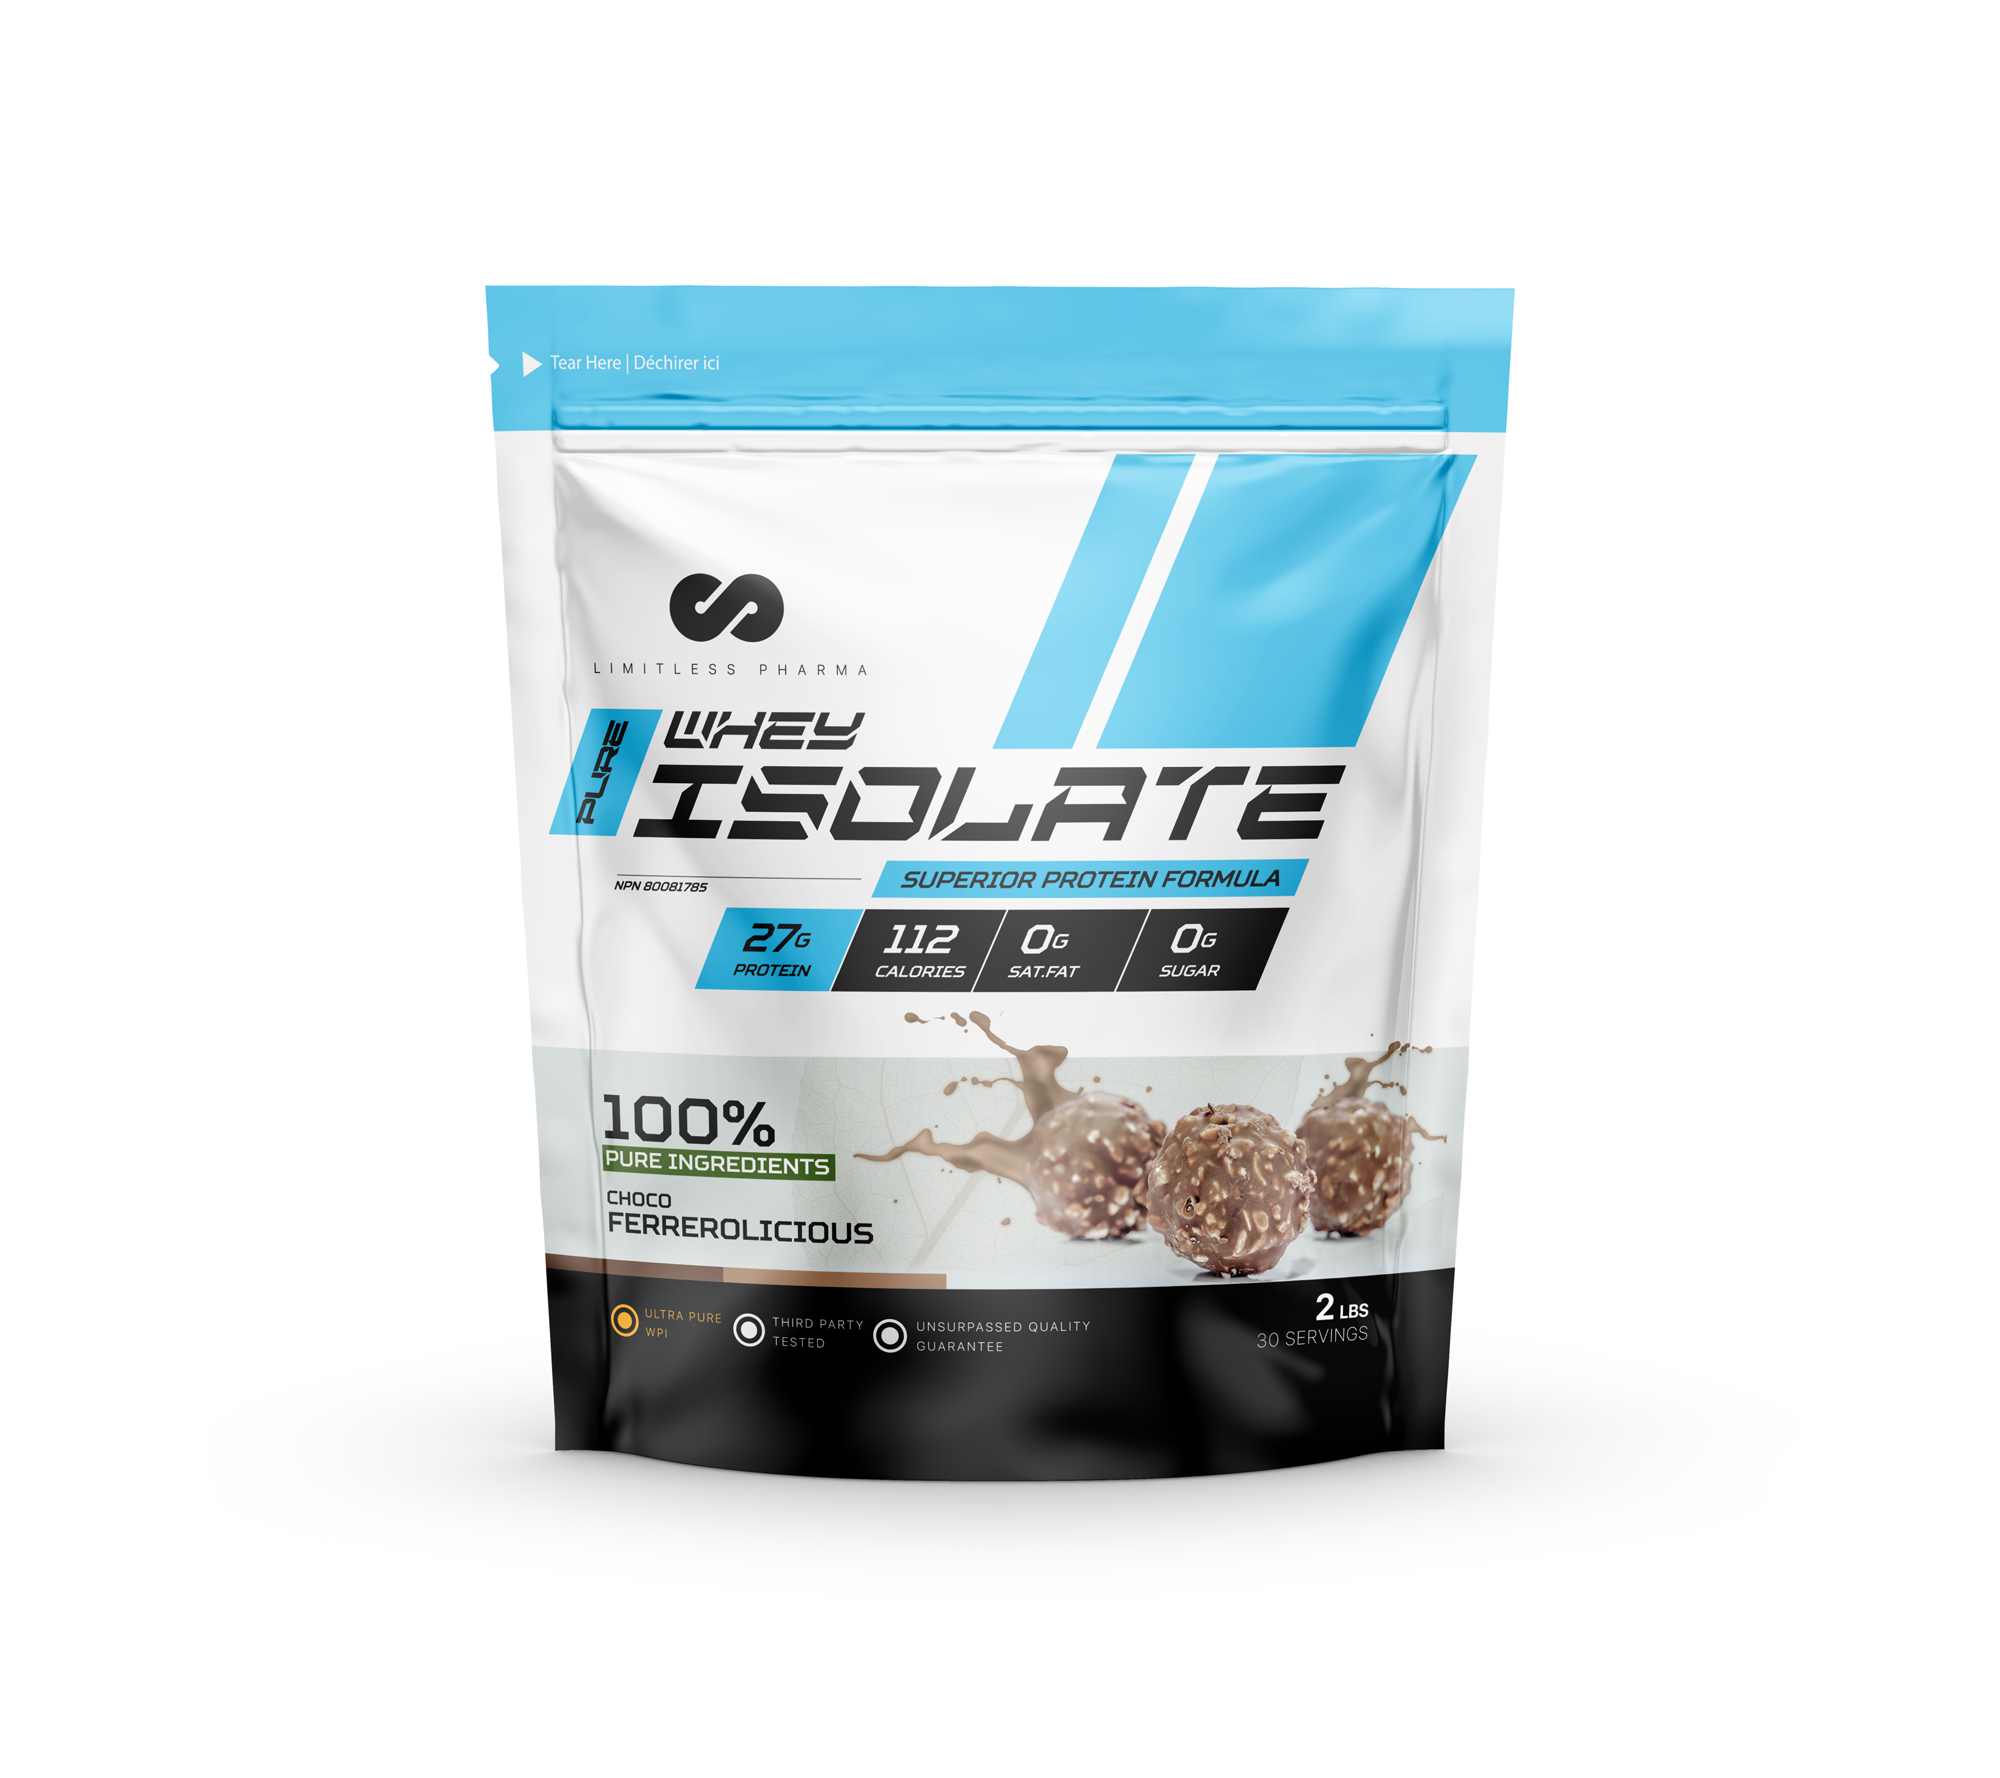 Weapons-Grade Whey Protein Isolate (2 lb) - Sports Performance